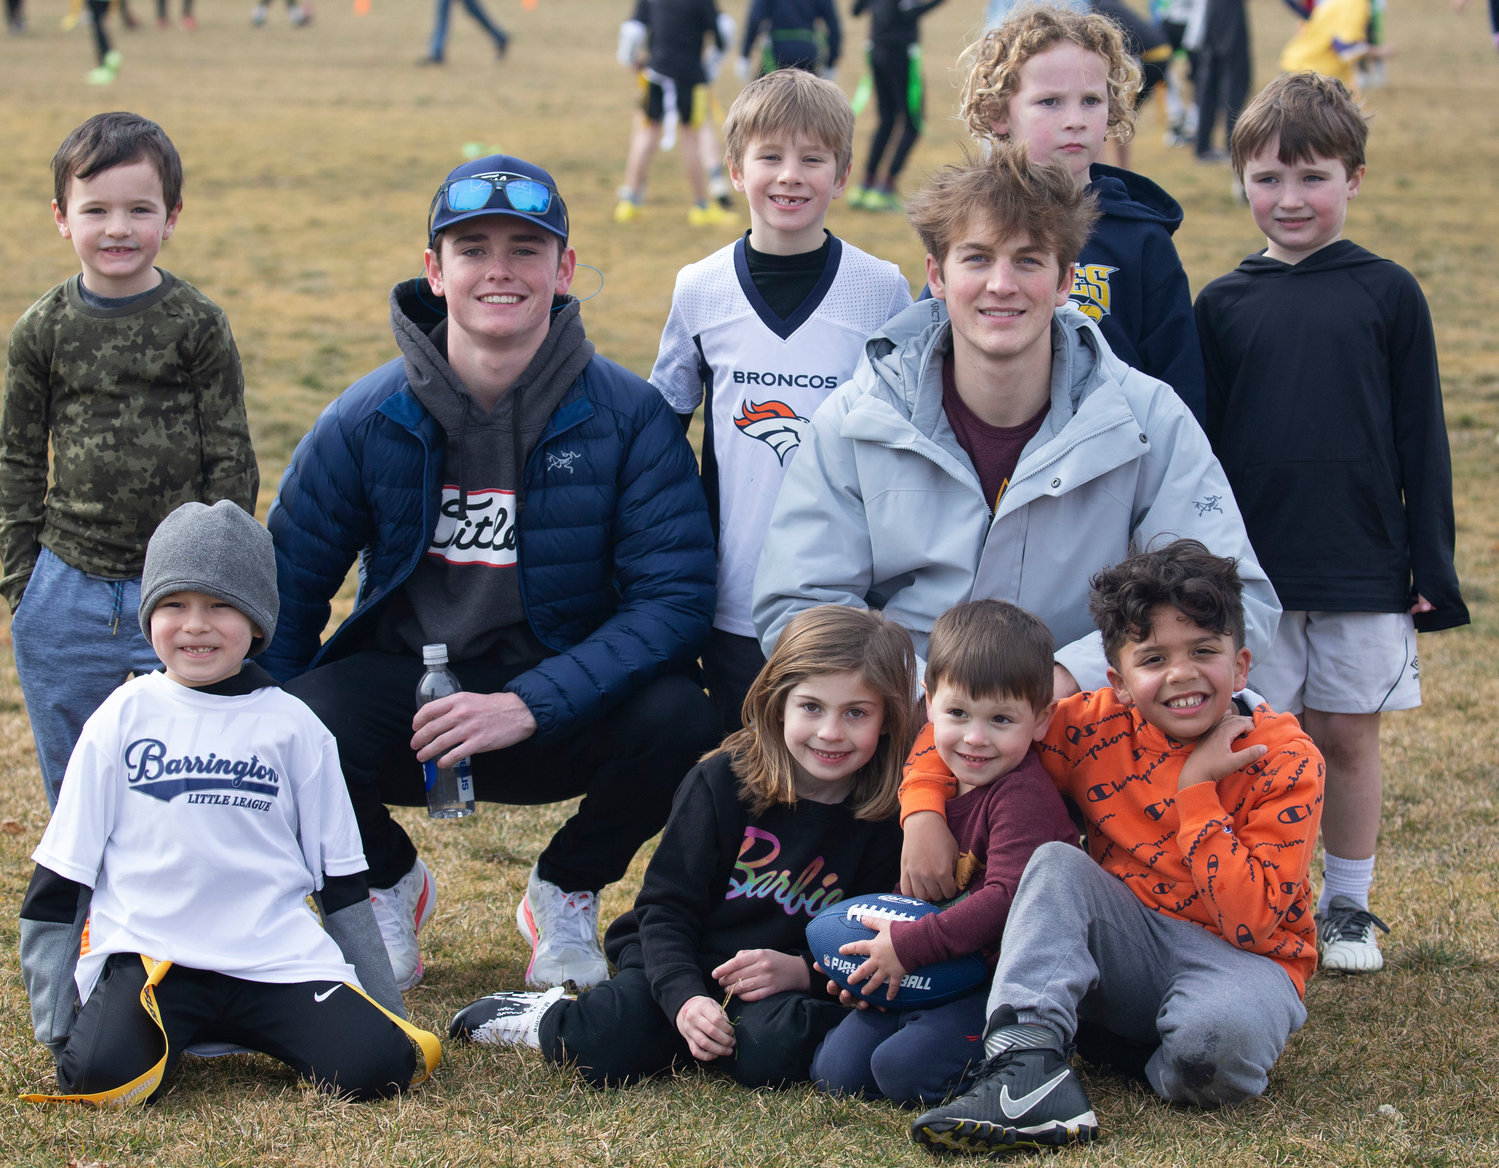 Barrington High School seniors Ryan O’Connell (left) and Harrison Cooley organized a youth flag football tournament for their Senior Projects. Here they are surrounded by children who participated in the tournament.